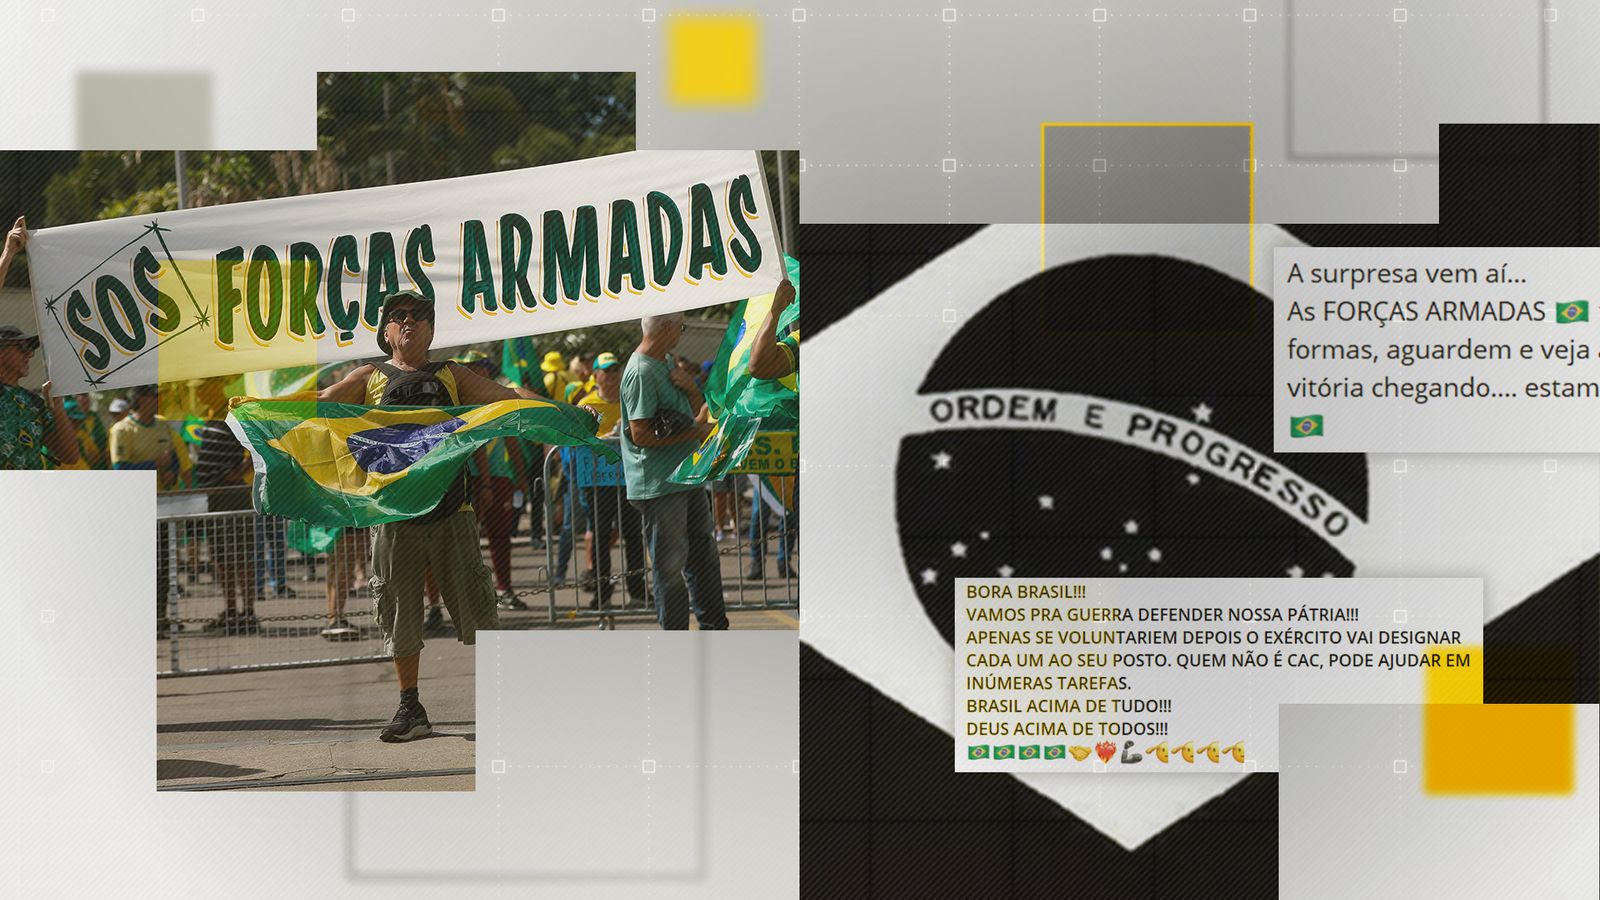 Brazilian election: Inside the online groups calling for a military coup